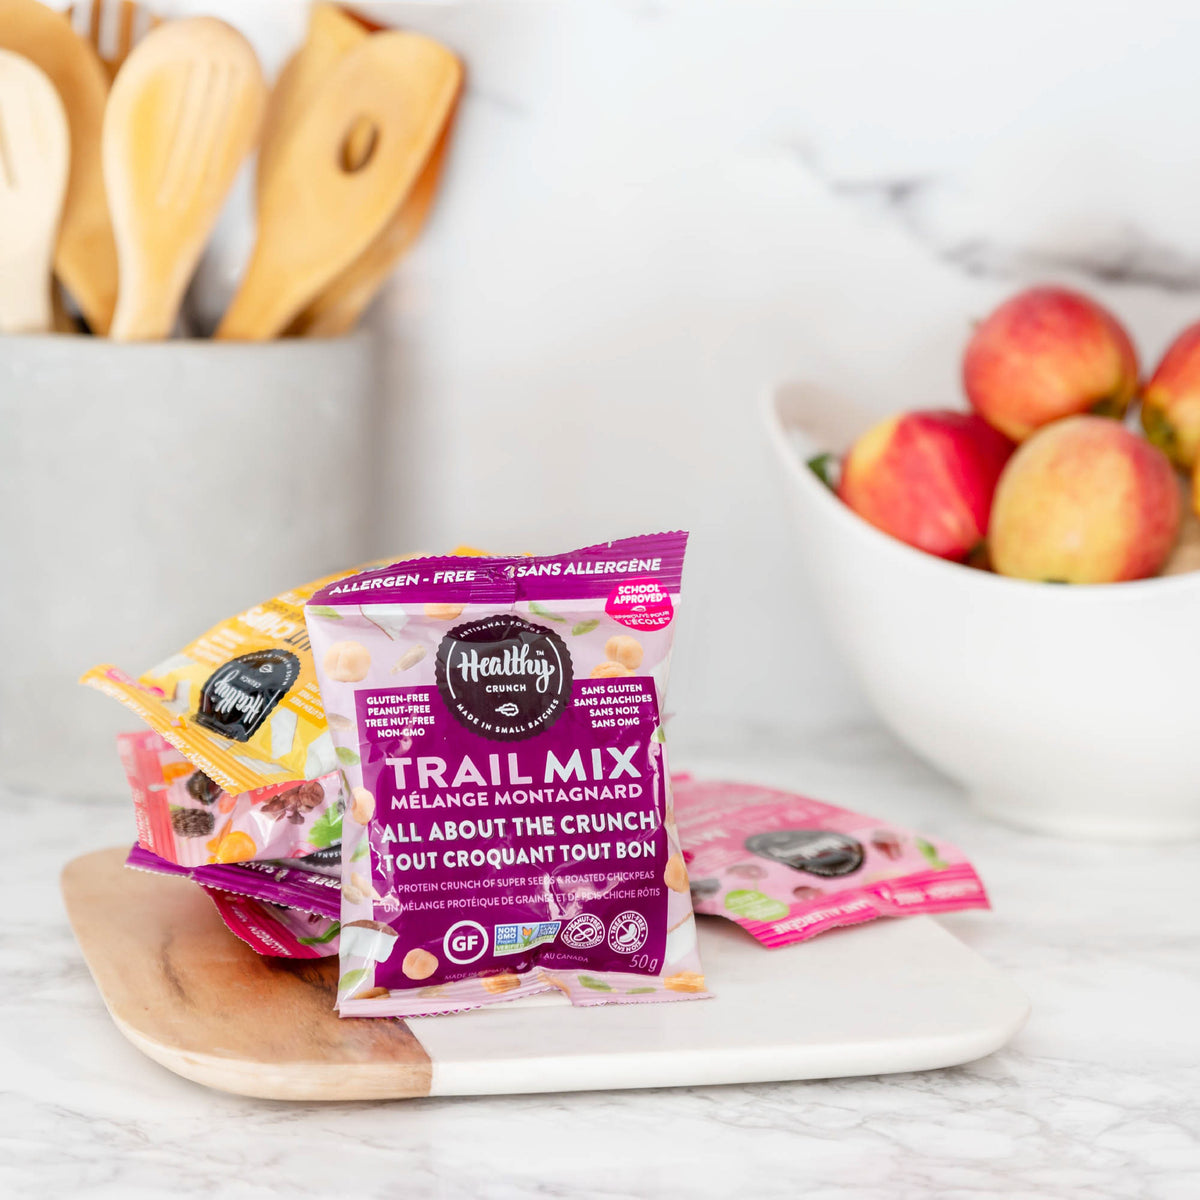 All About The Crunch Trail Mix